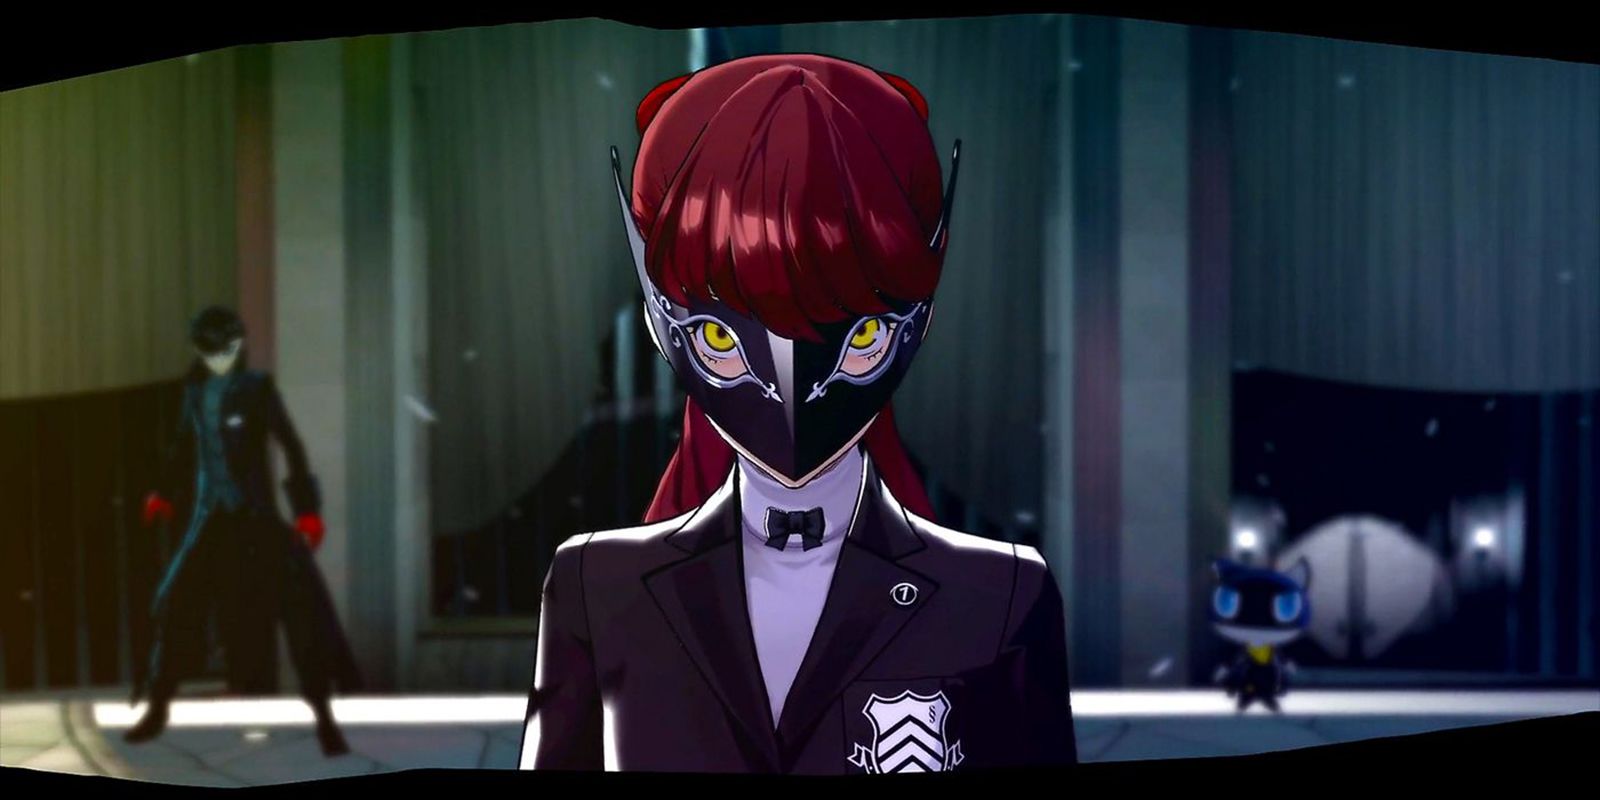 Persona 5 Royal Screenshot Of Red Haired Character Wearing Mask